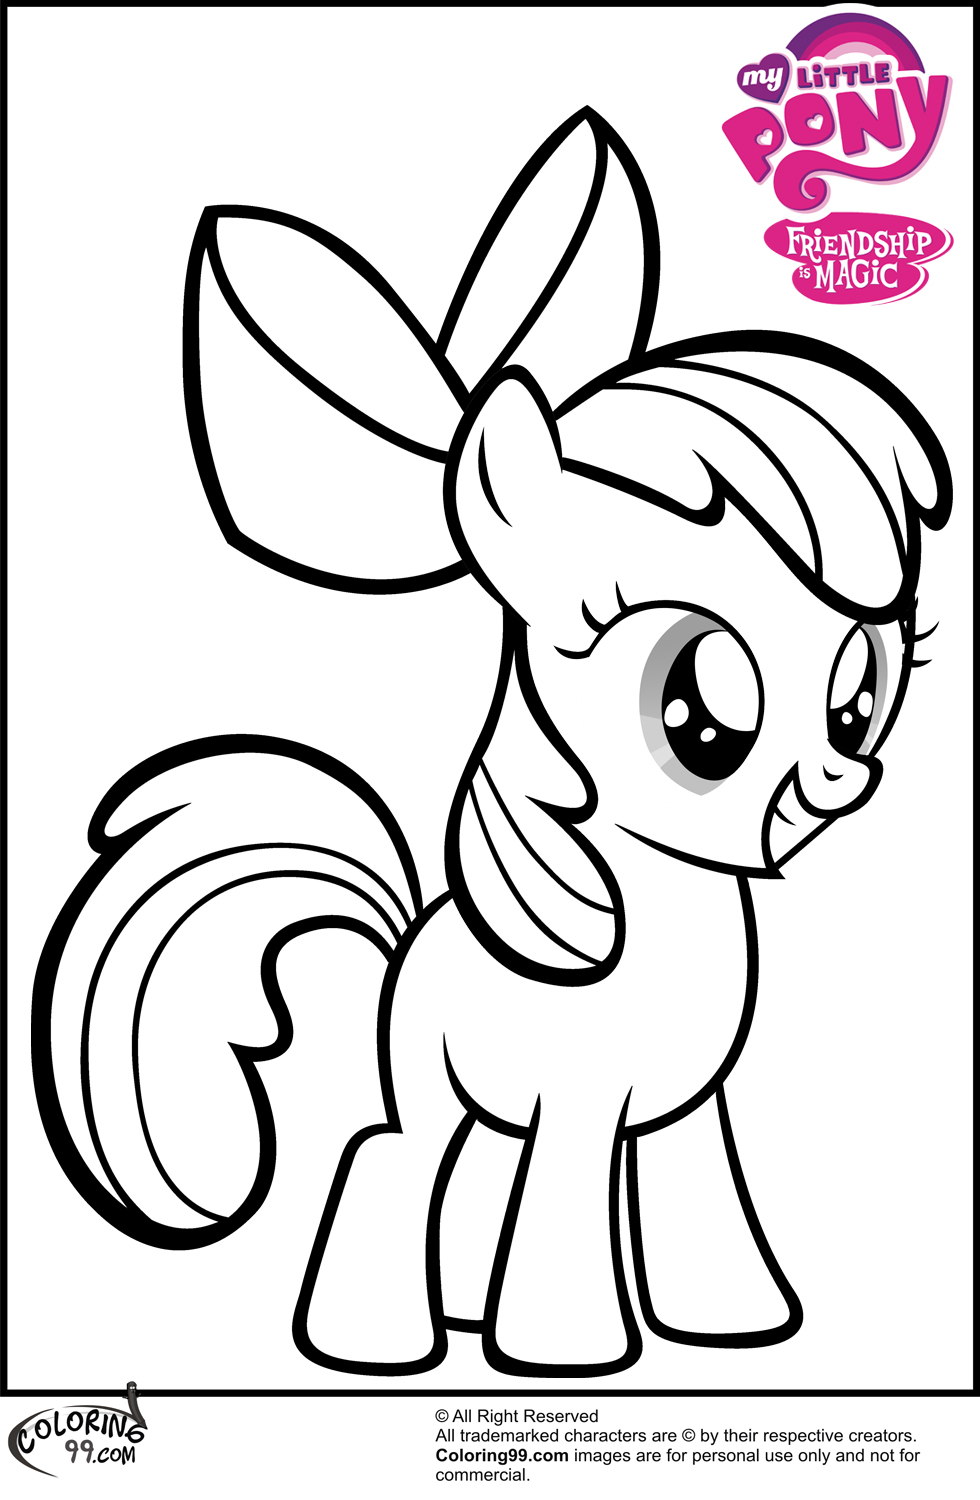 MLP Apple Bloom Coloring Pages | Team colors